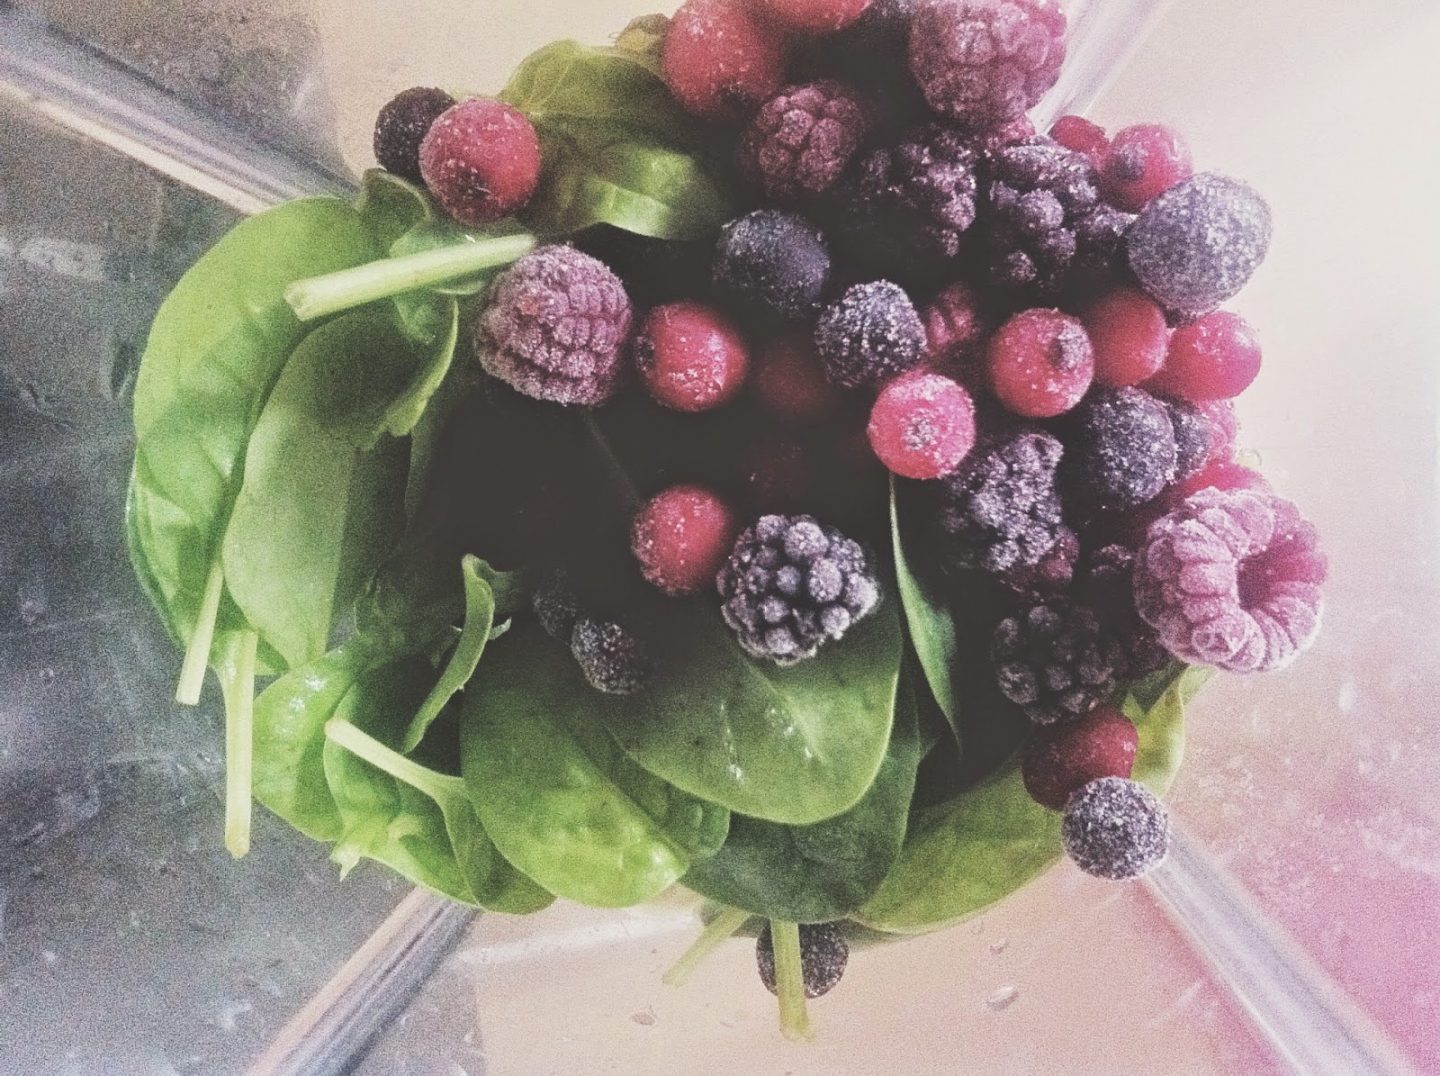 Spinach and berries in a blender